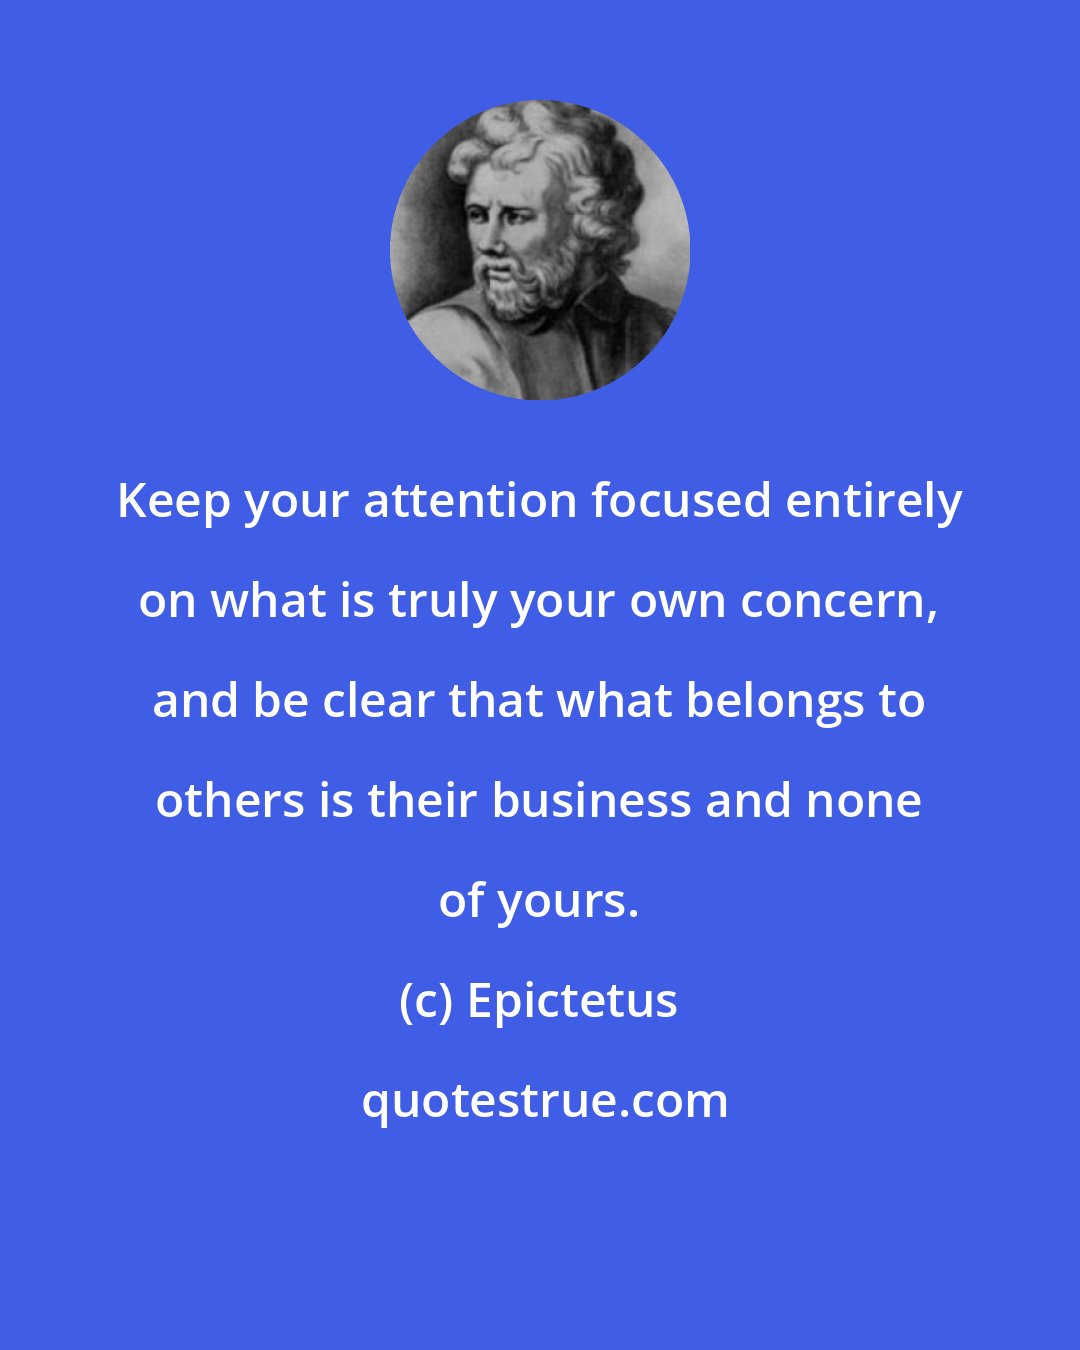 Epictetus: Keep your attention focused entirely on what is truly your own concern, and be clear that what belongs to others is their business and none of yours.